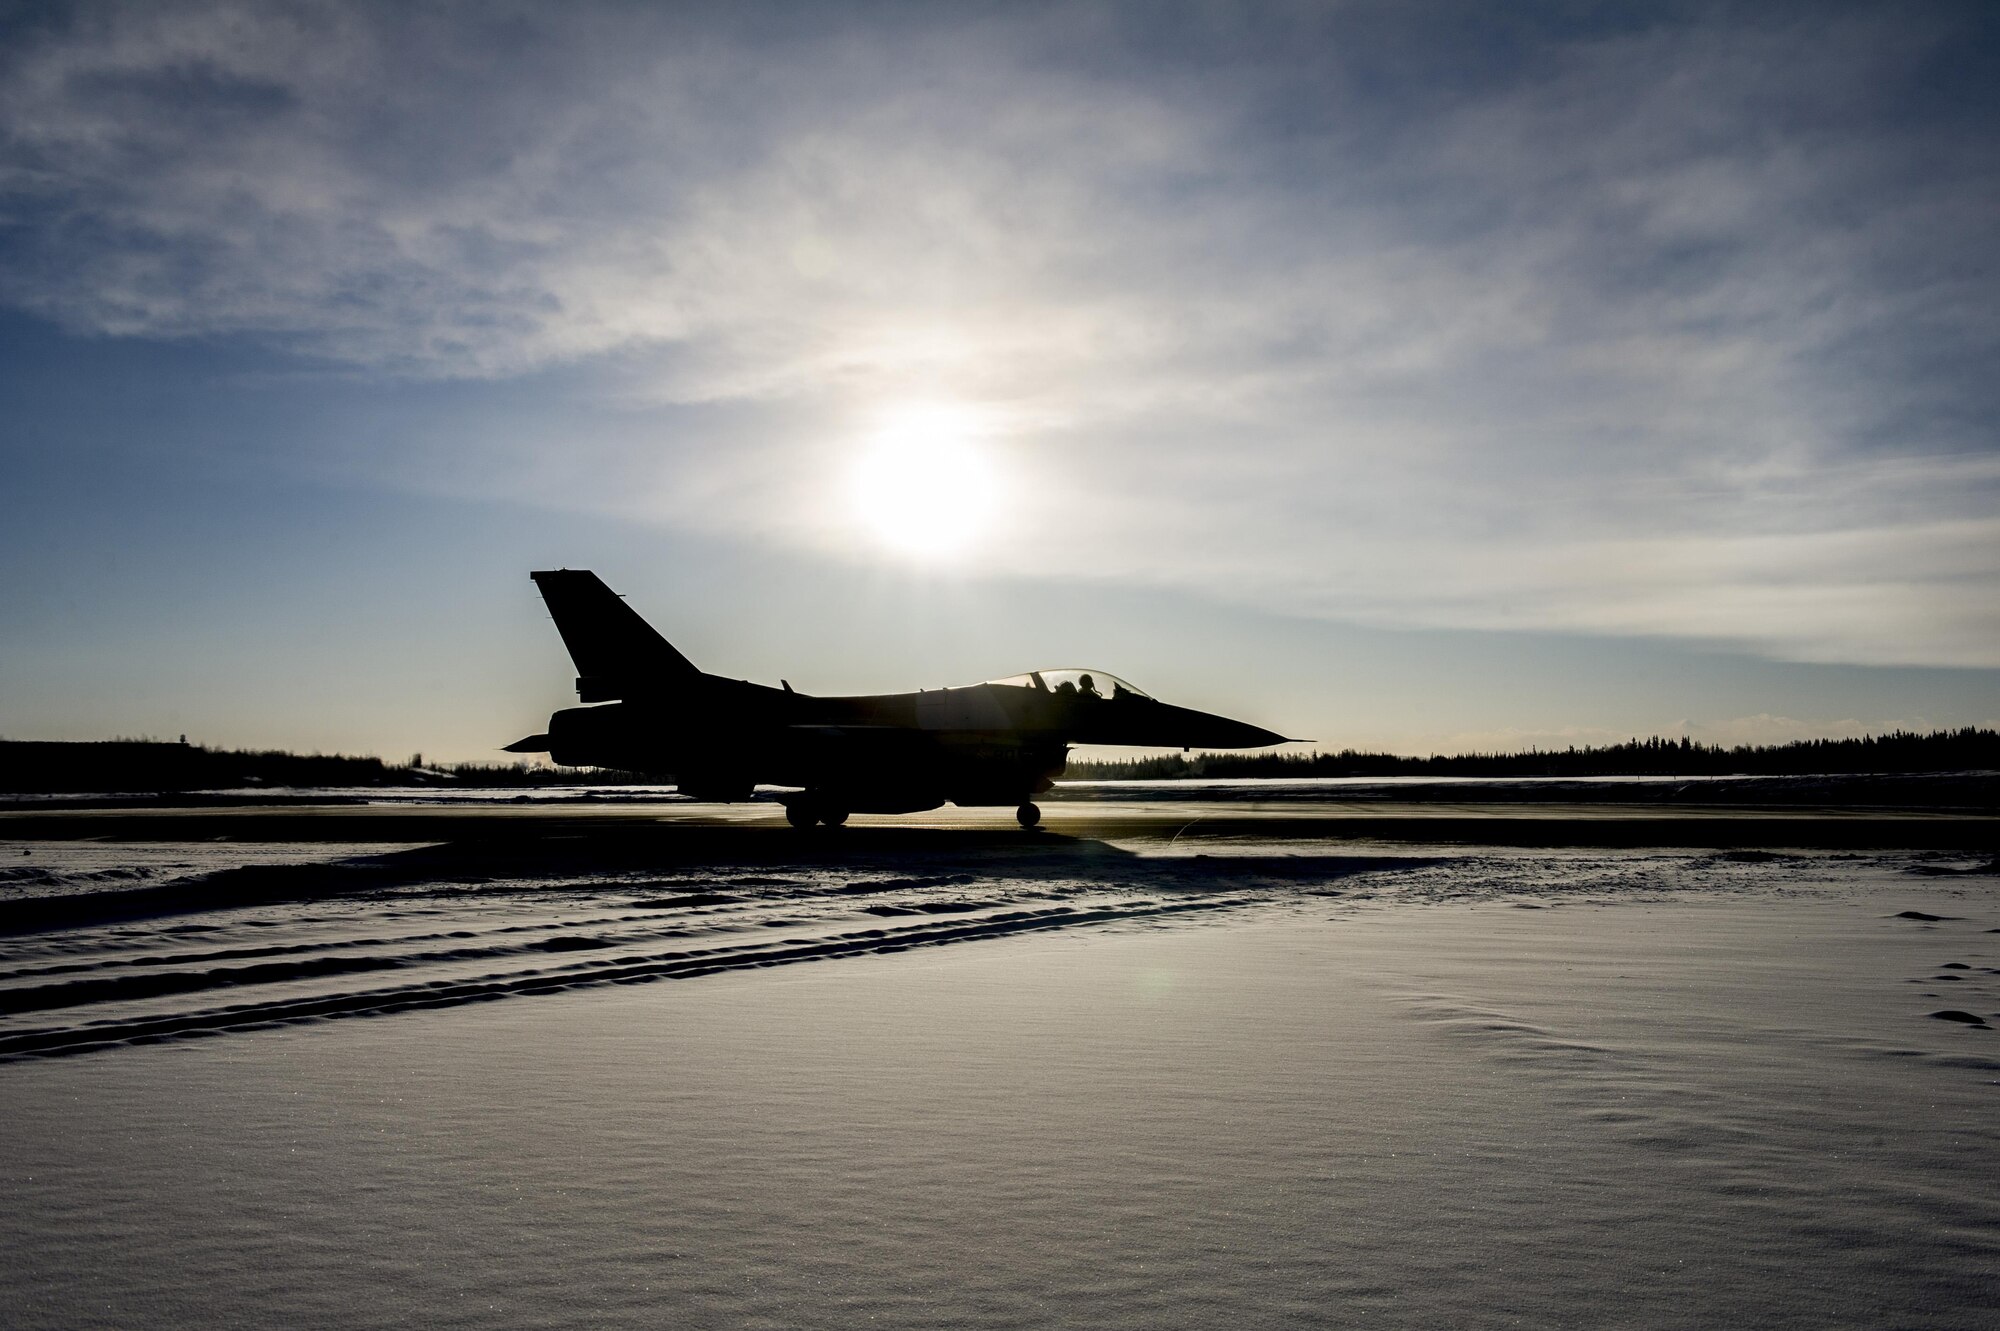 A U.S. Air Force F-16 Fighting Falcon aircraft assigned to the 18th Aggressor Squadron, waits on the taxi-way Feb. 12, 2017, at Eielson Air Force Base, Alaska. The aircraft was part of the group that deployed to Andersen Air Force Base, Guam, in support of COPE NORTH 2017, an exercise designed to increase combat readiness among coalition forces. (U.S. Air Force photo by Airman Isaac Johnson)